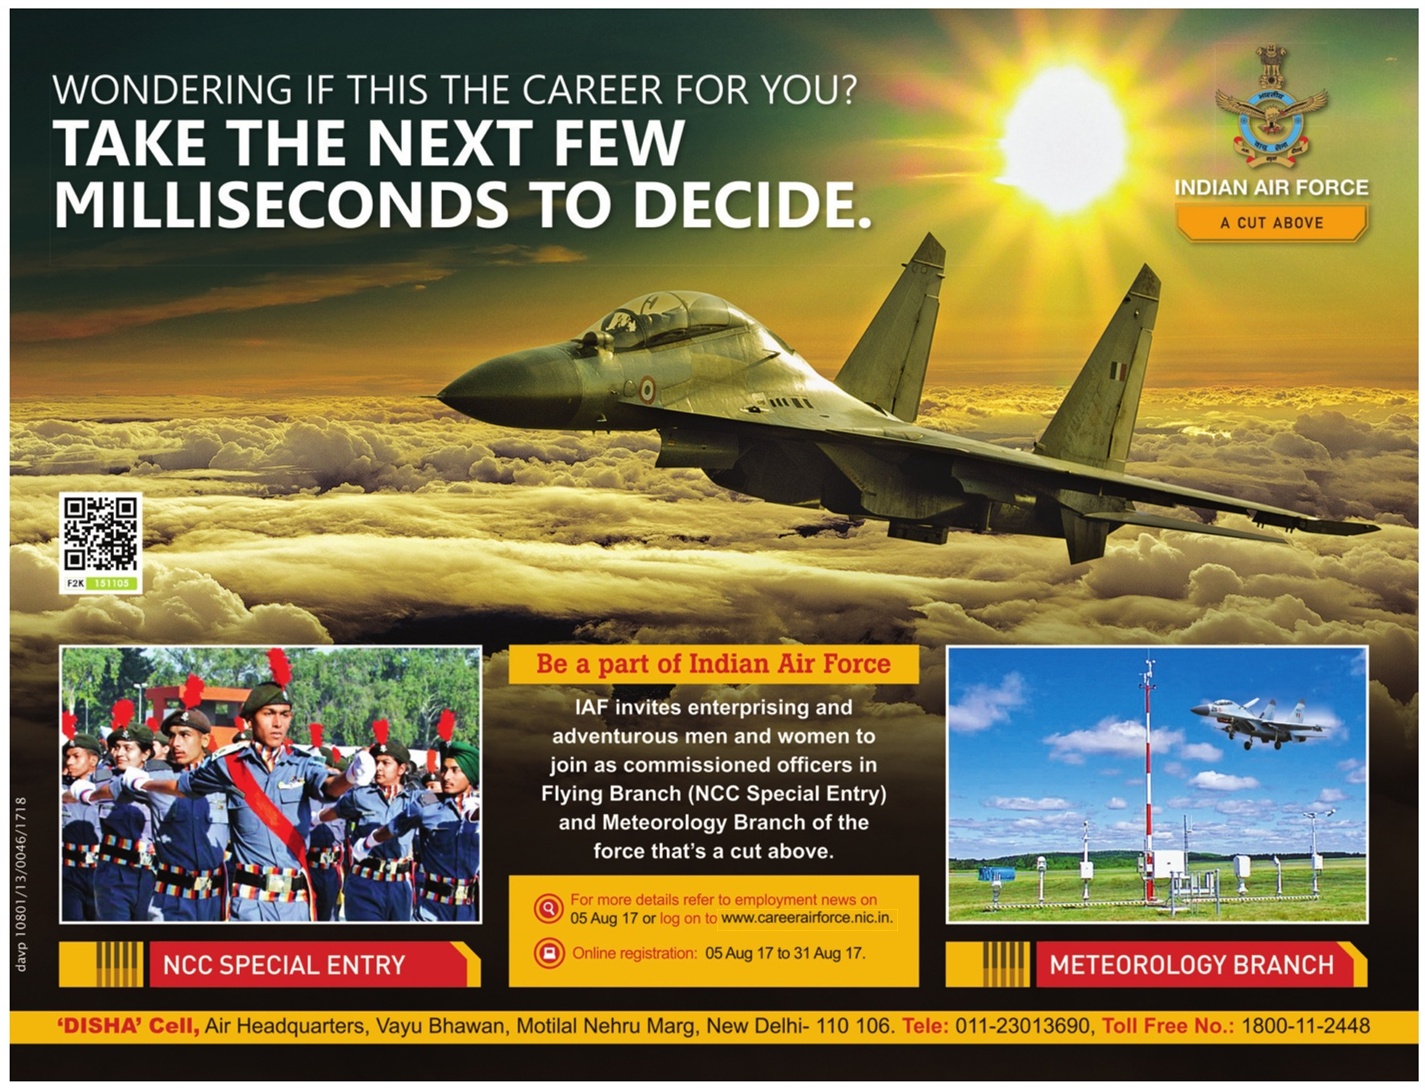 indian-air-force-a-cut-above-wondering-if-this-the-career-for-you-ad-times-of-india-delhi-13-08-2017.jpg